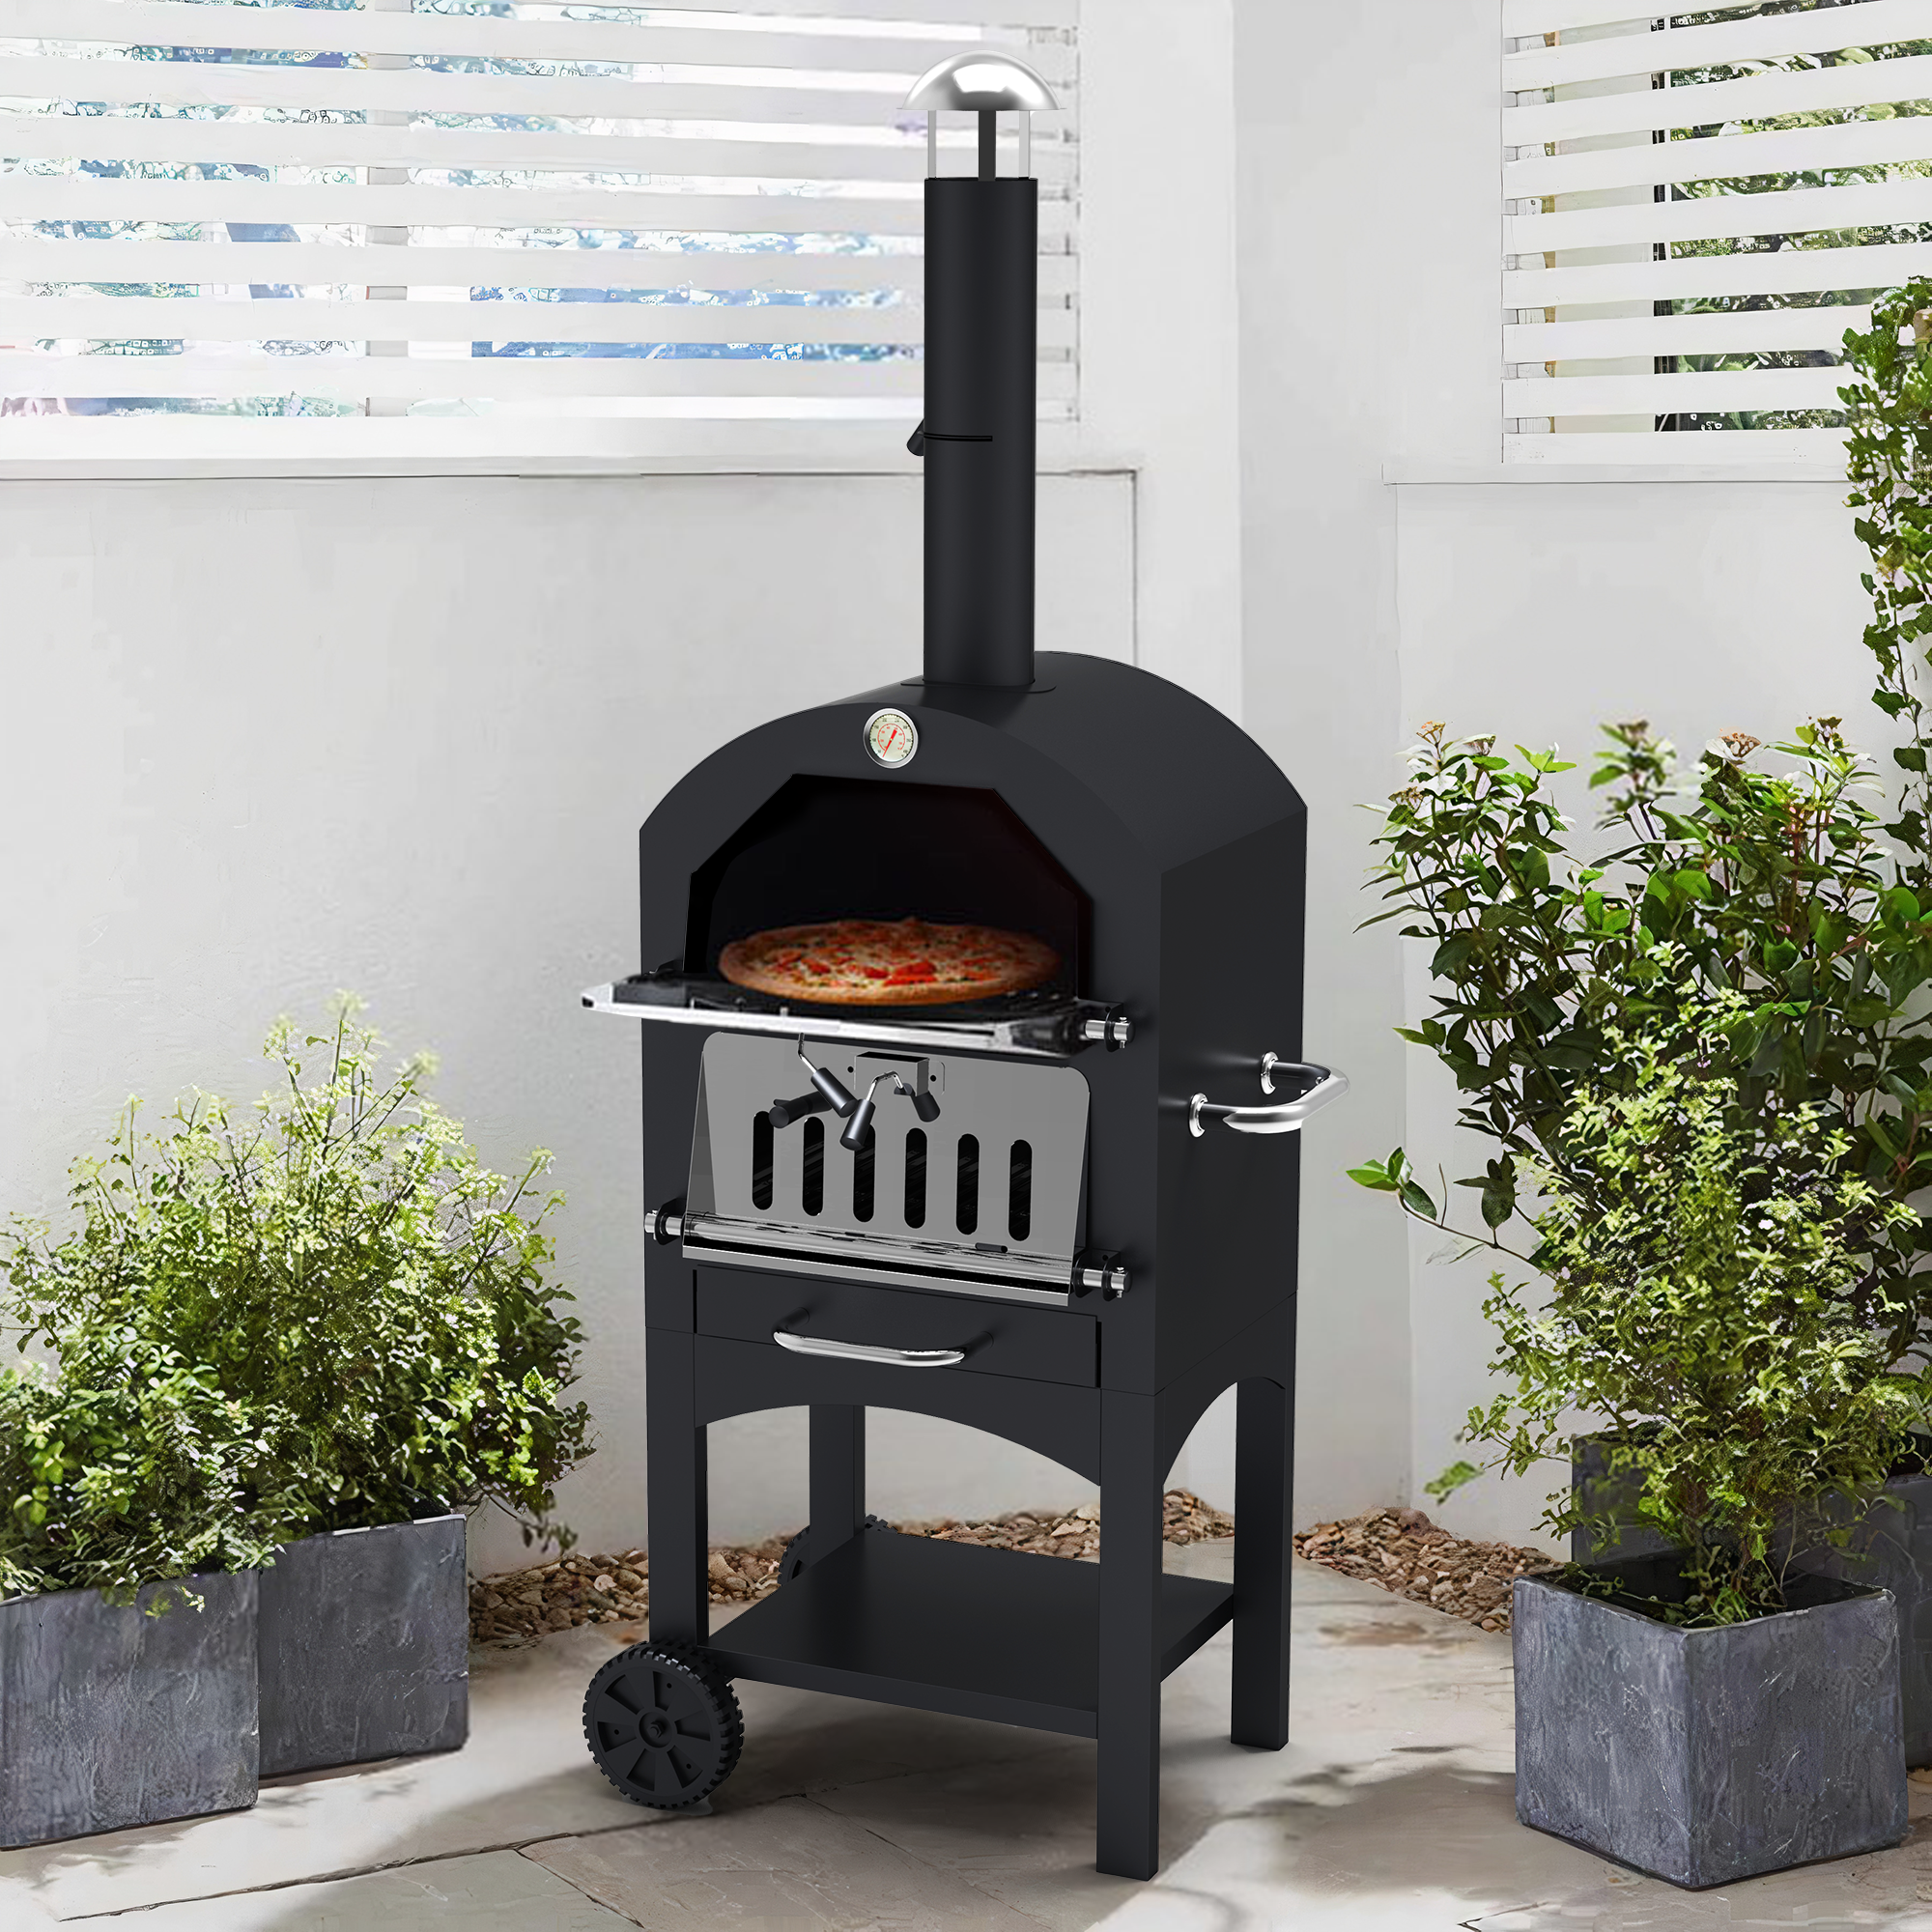 3-in-1 Outdoor Pizza Oven, Chimney Smoker & Charcoal Barbecue | BillyOh BBQ